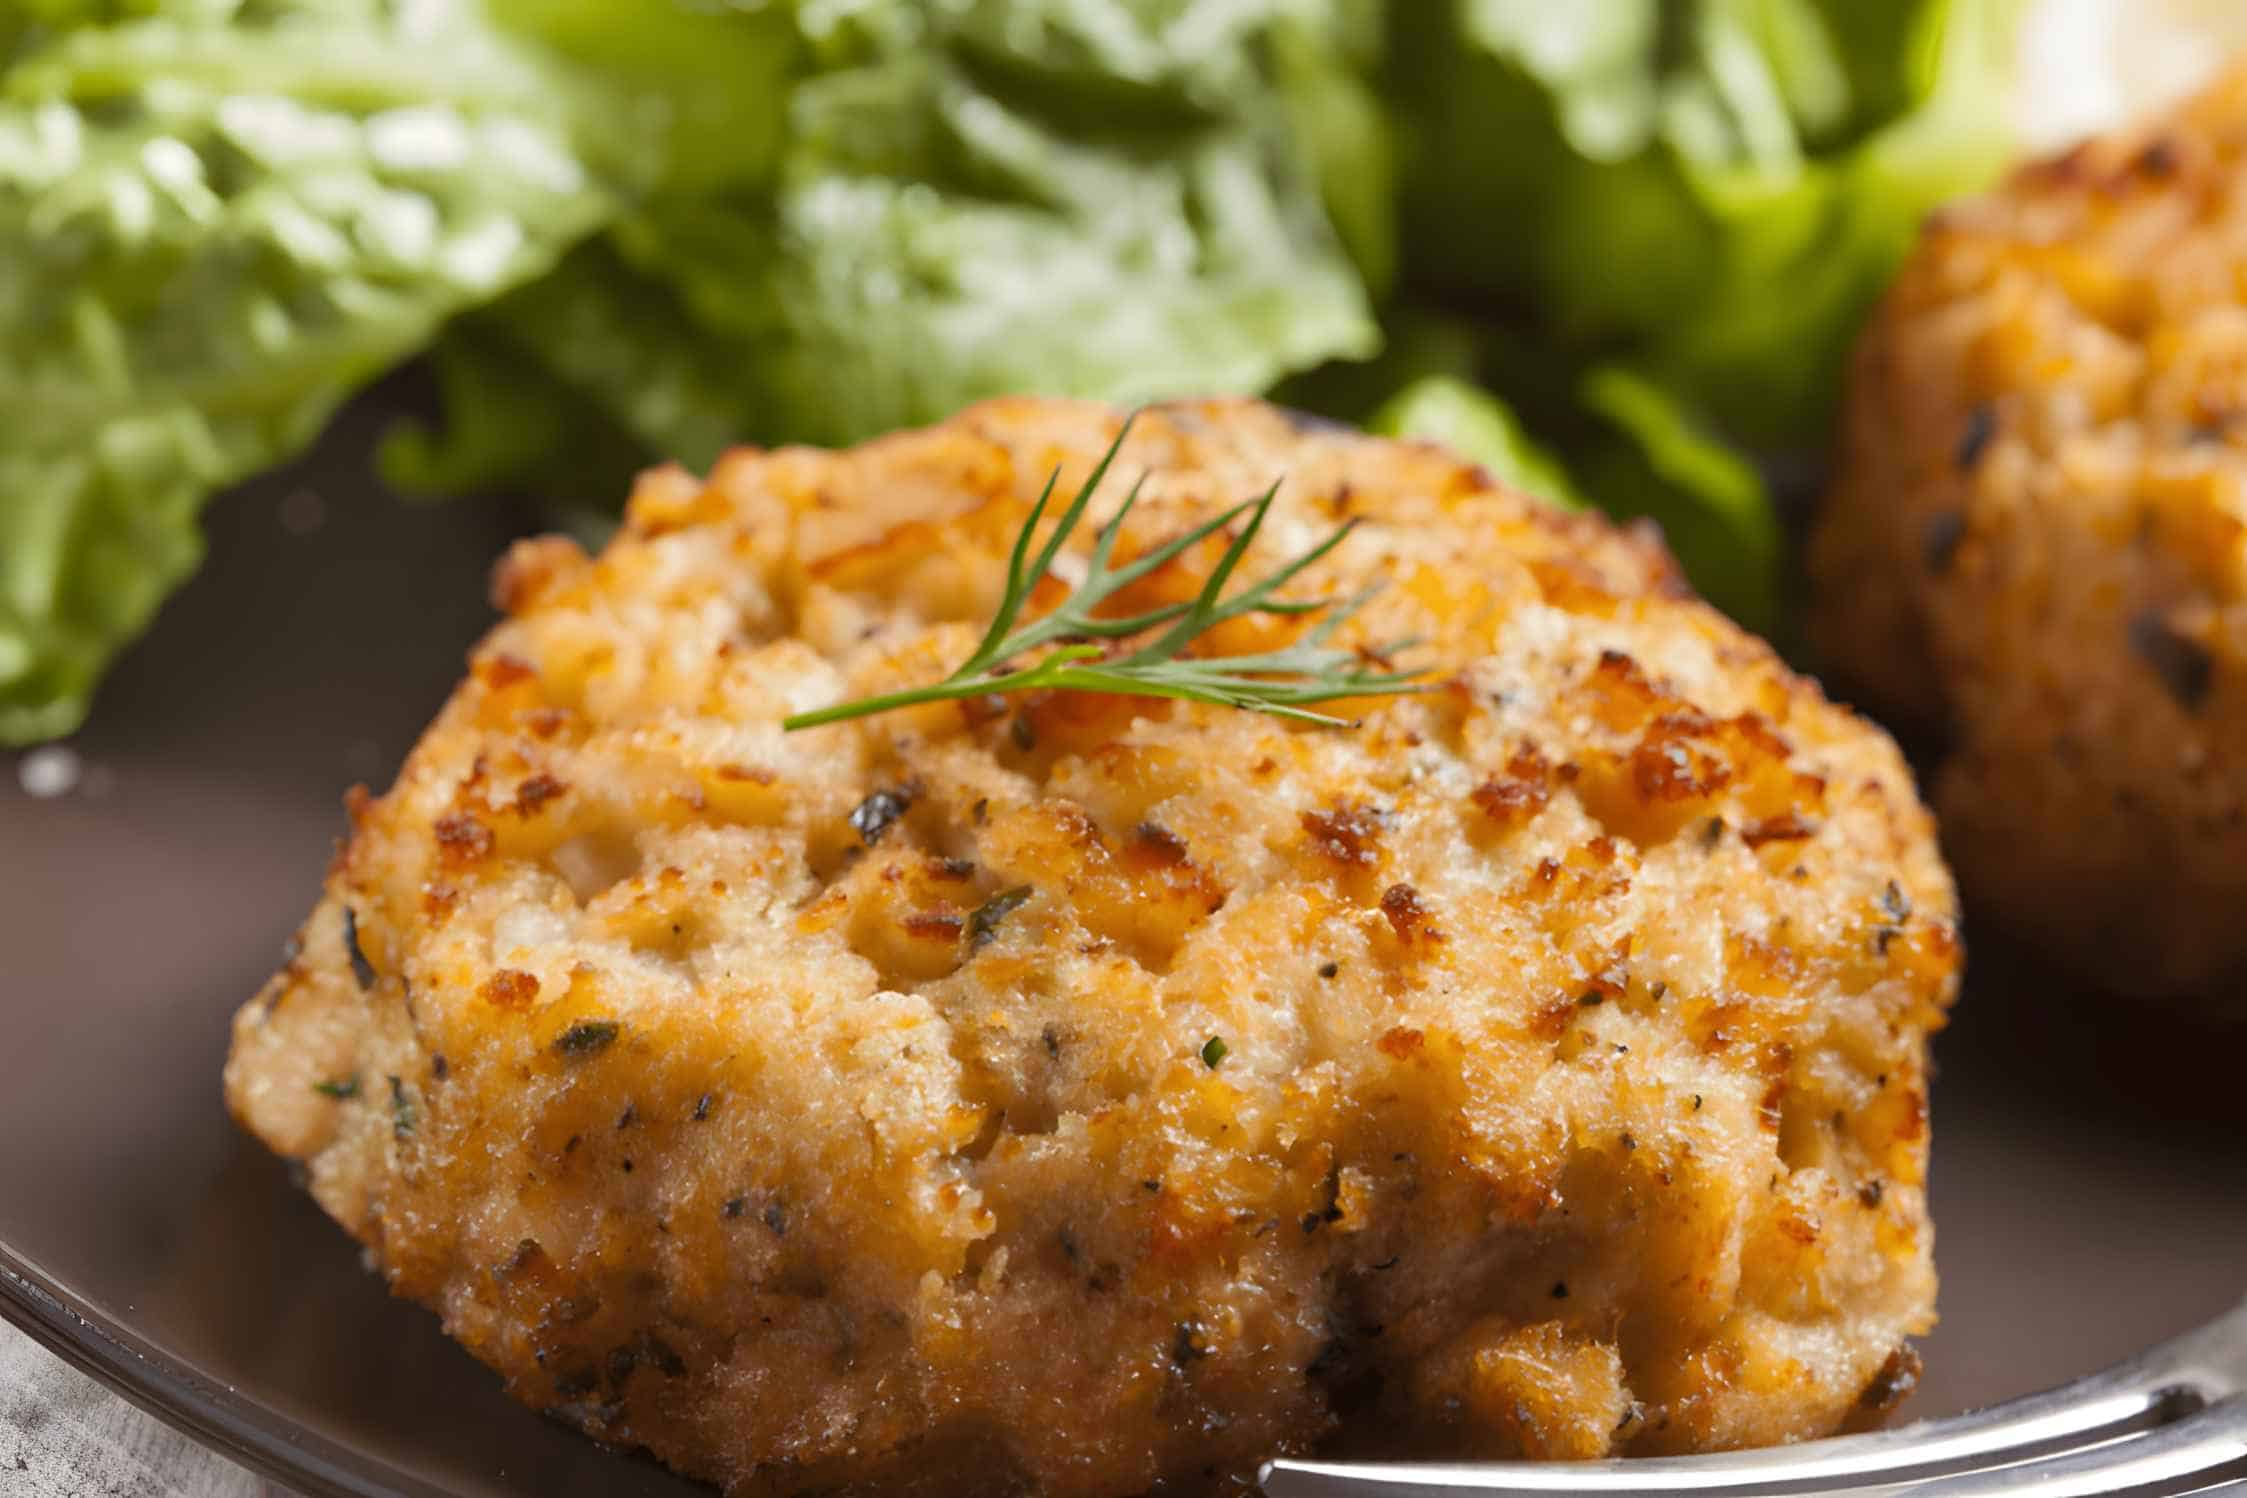 Best Side Dishes For Crab Cakes